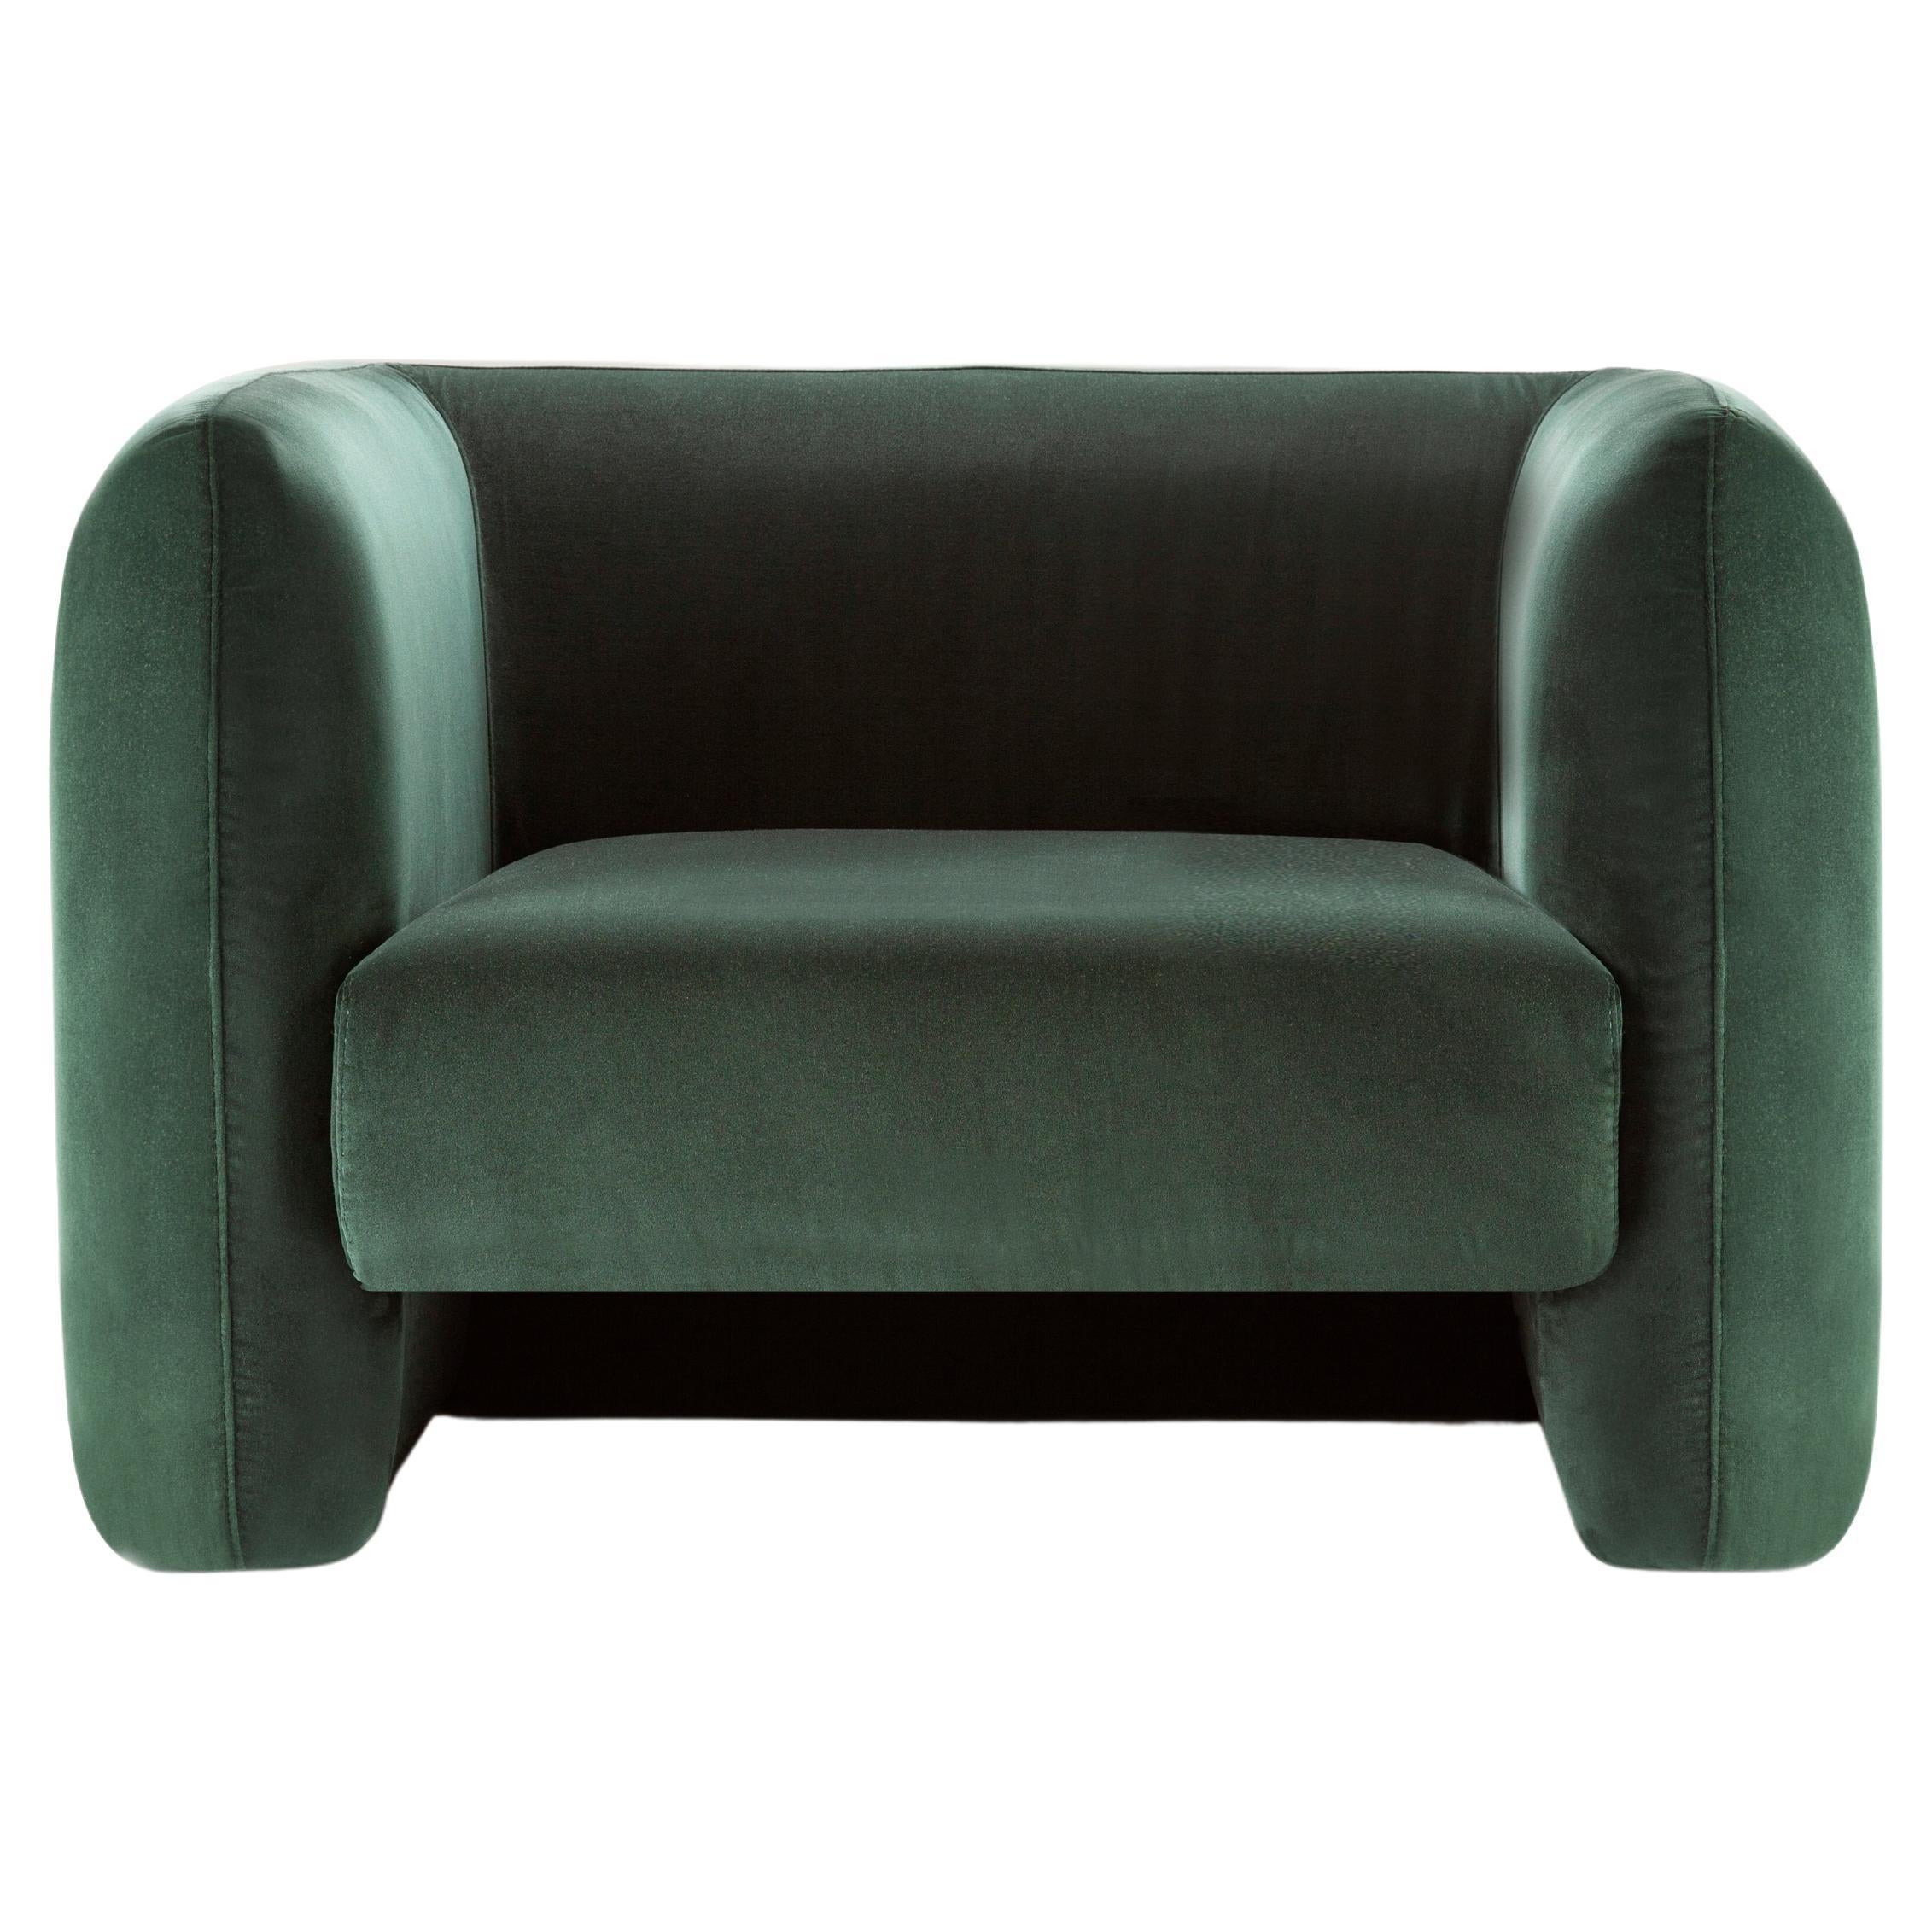 Contemporary Modern Jacob Armchair in Green Velvet Fabric by Collector Studio